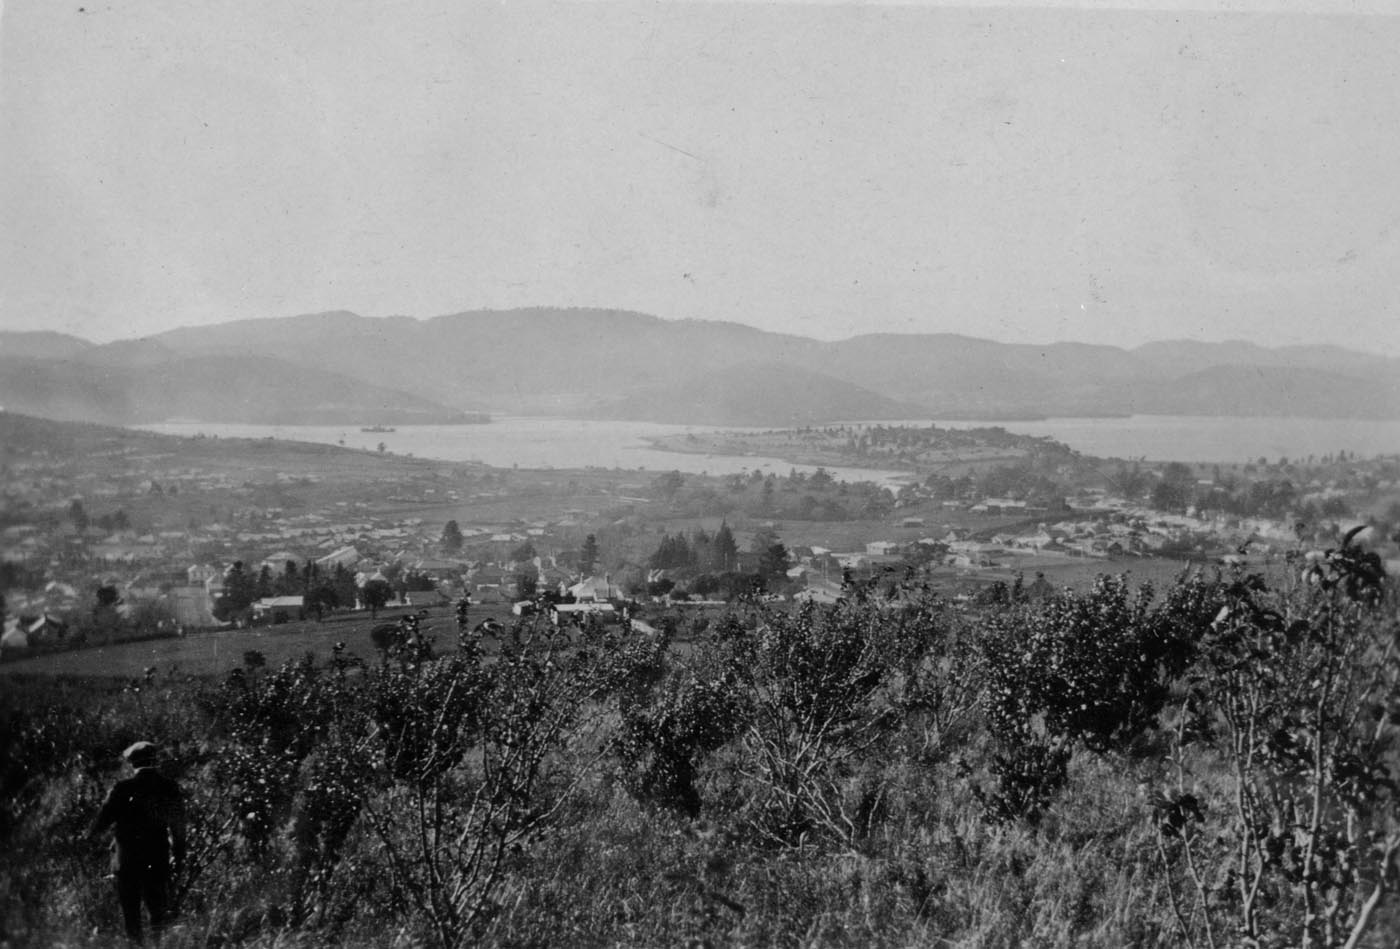 Black and white photo of a view from an orchard looking over a town with a river beyond.